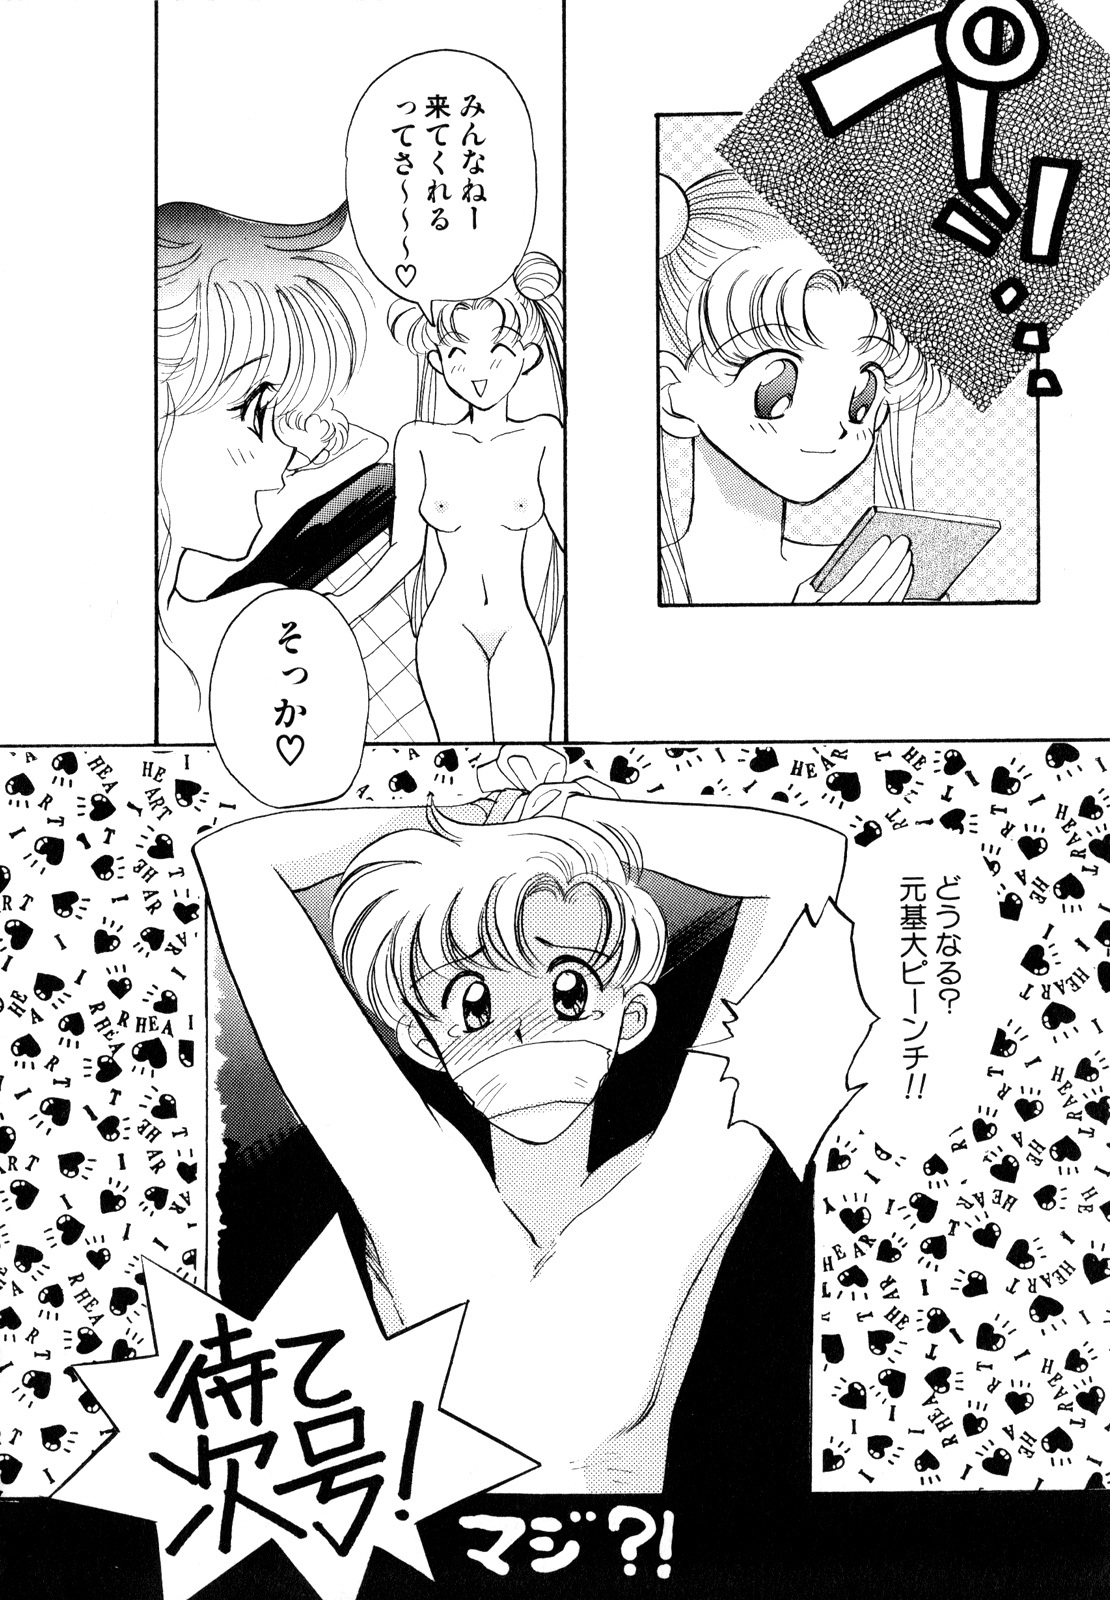 [Anthology] Lunatic Party 2 (Sailor Moon) page 21 full